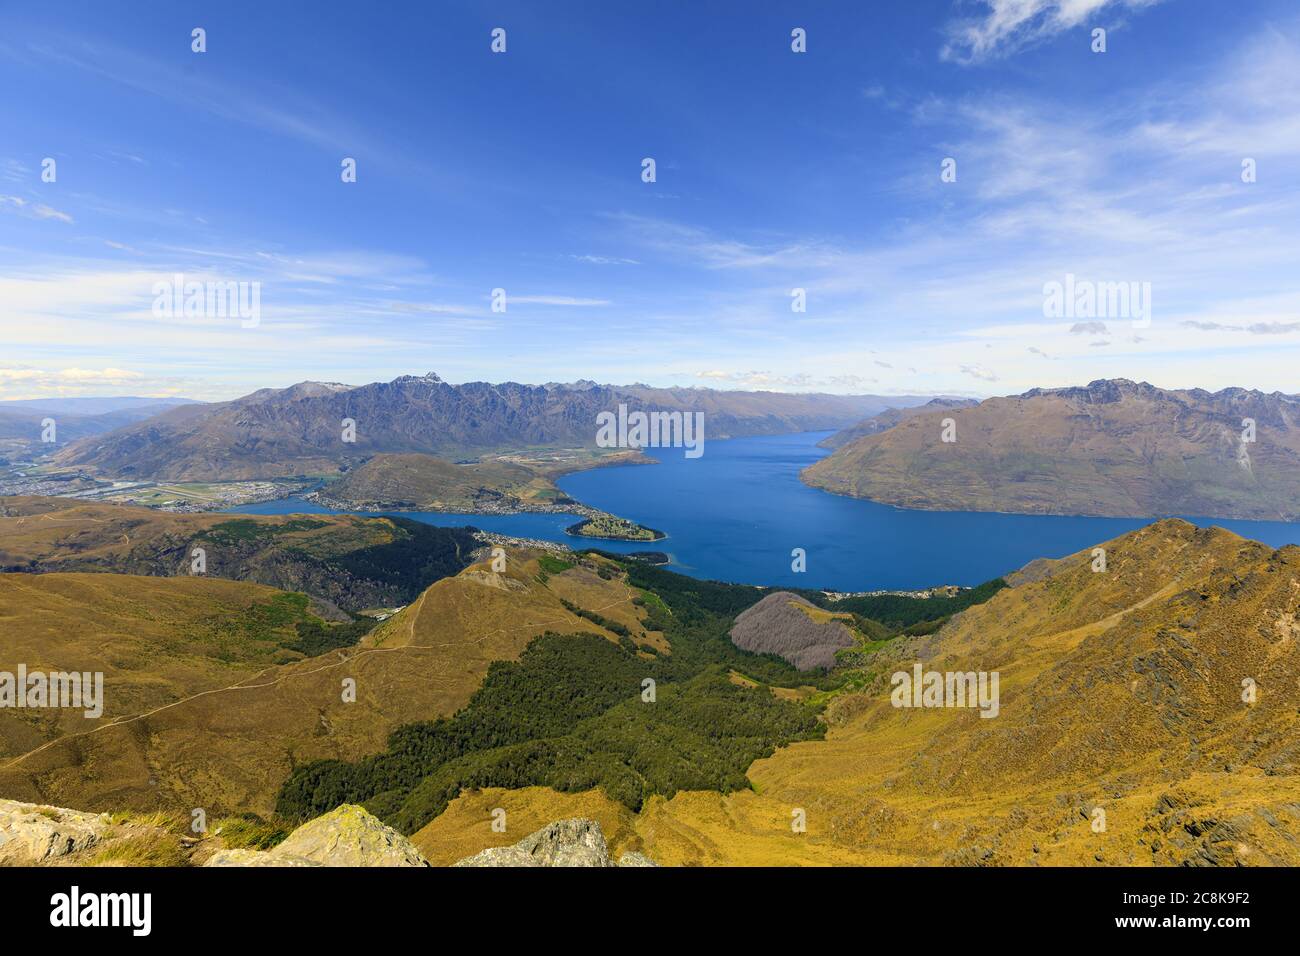 The view from the saddle of Ben Lomond over Queenstown and Lake Wakatipu. Otago, Queenstown, New Zealand. Stock Photo